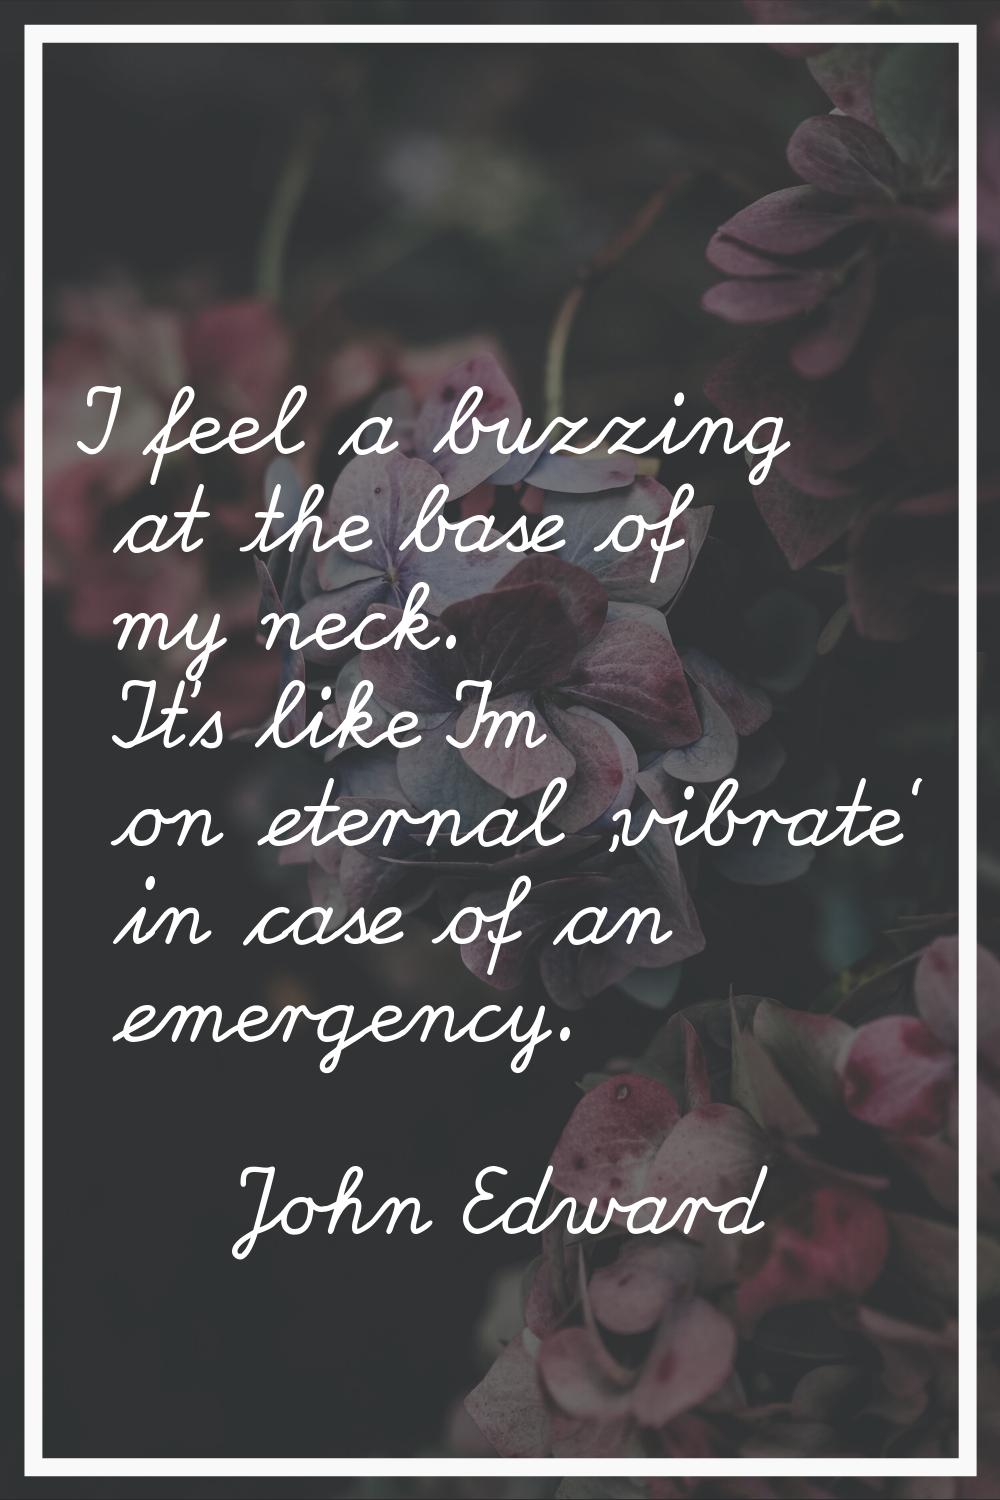 I feel a buzzing at the base of my neck. It's like I'm on eternal 'vibrate' in case of an emergency